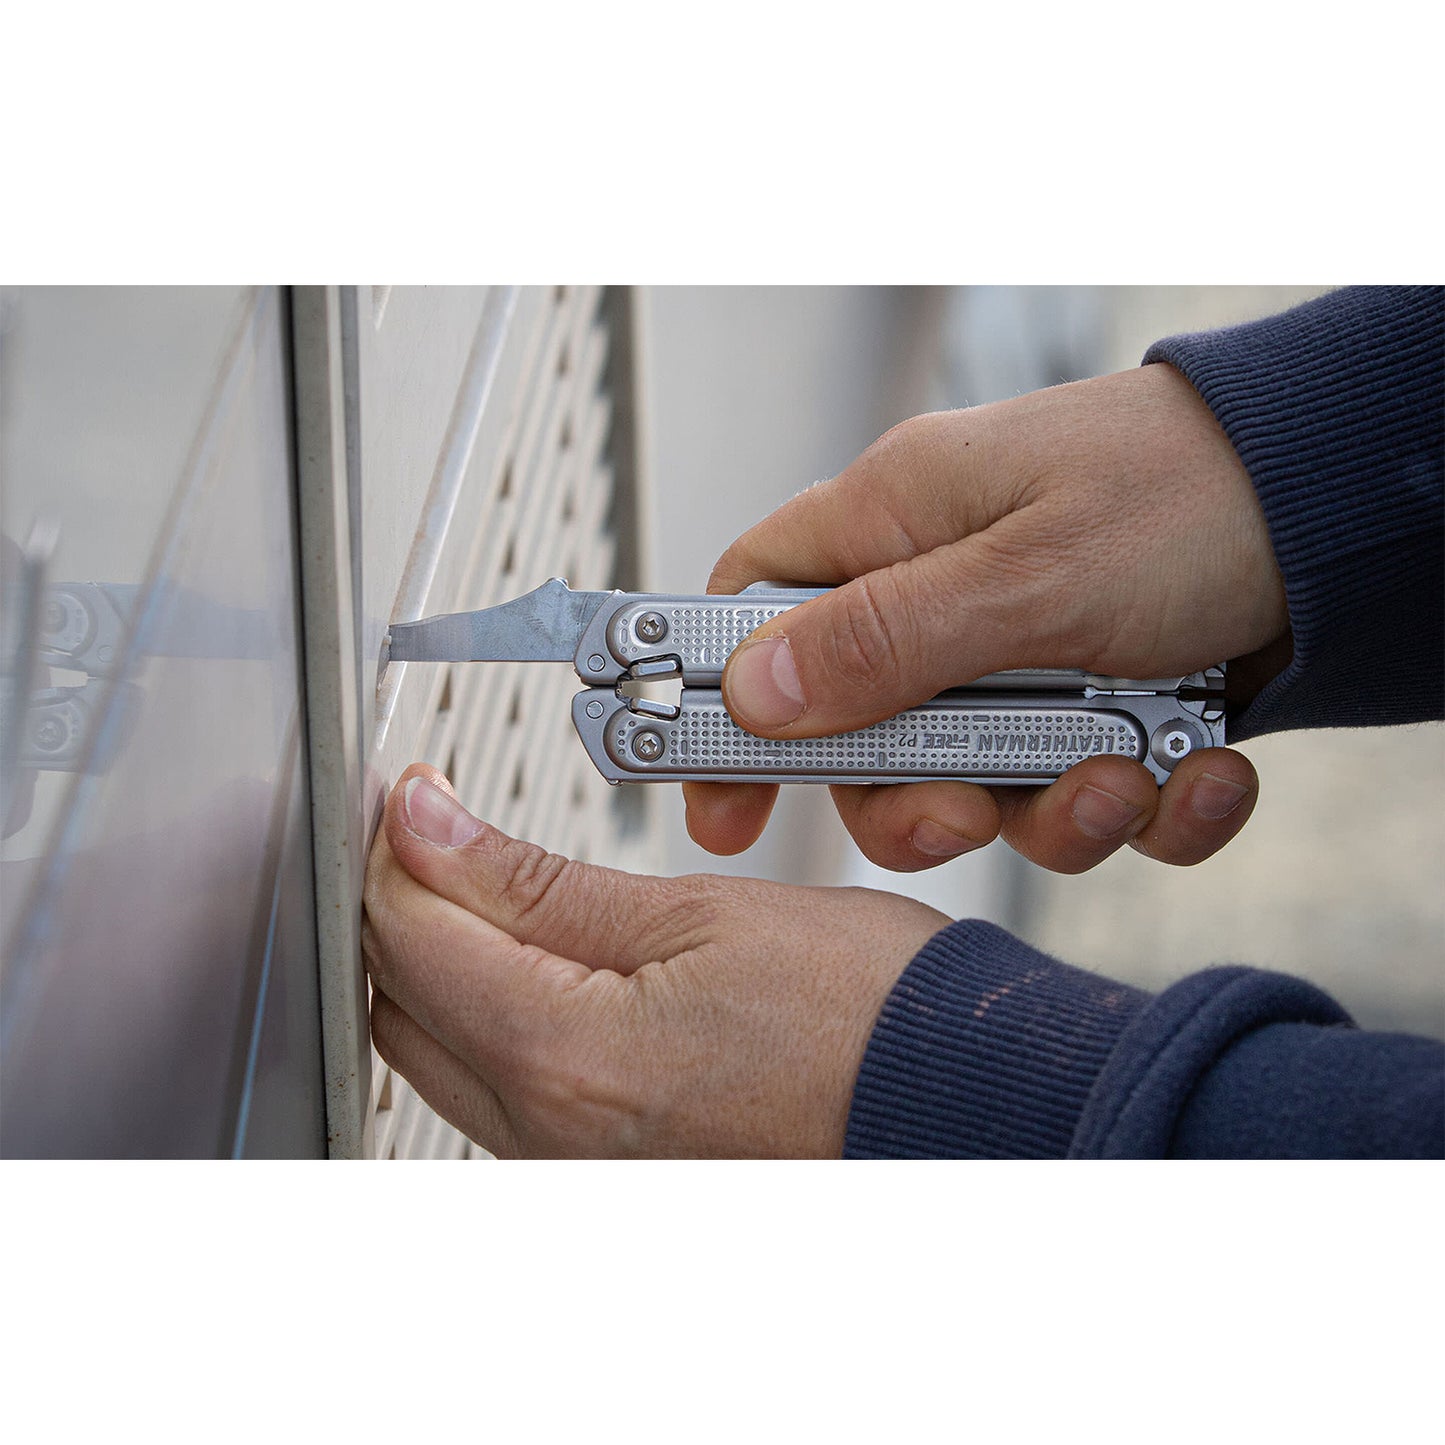 Leatherman FREE® P4: The Premier Choice for Professional Multitools